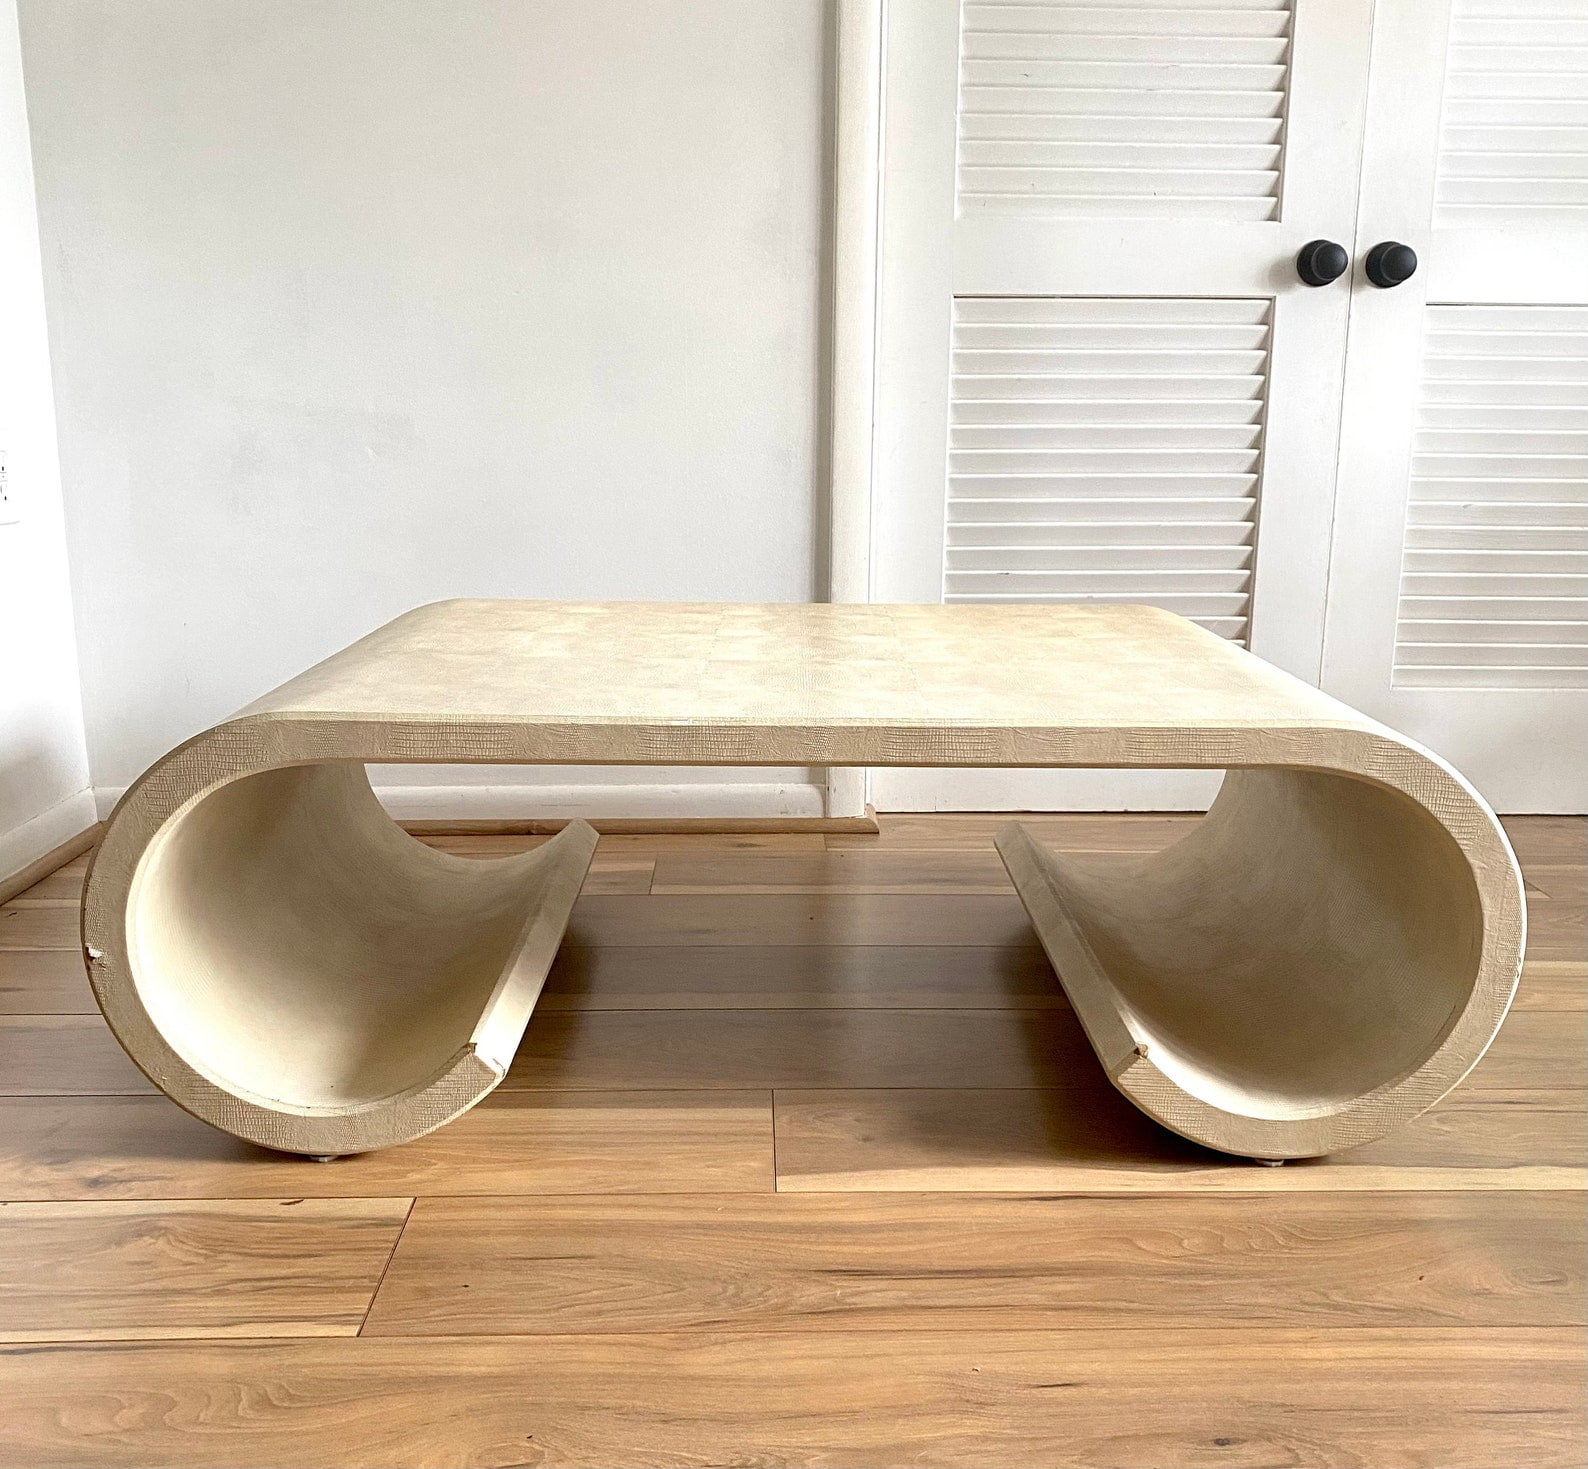 Postmodern Scroll Coffee Table in Style of Karl Springer, Contemporary Scrolled Waterfall Table with Faux Snakeskin Patina, Postmodern Table